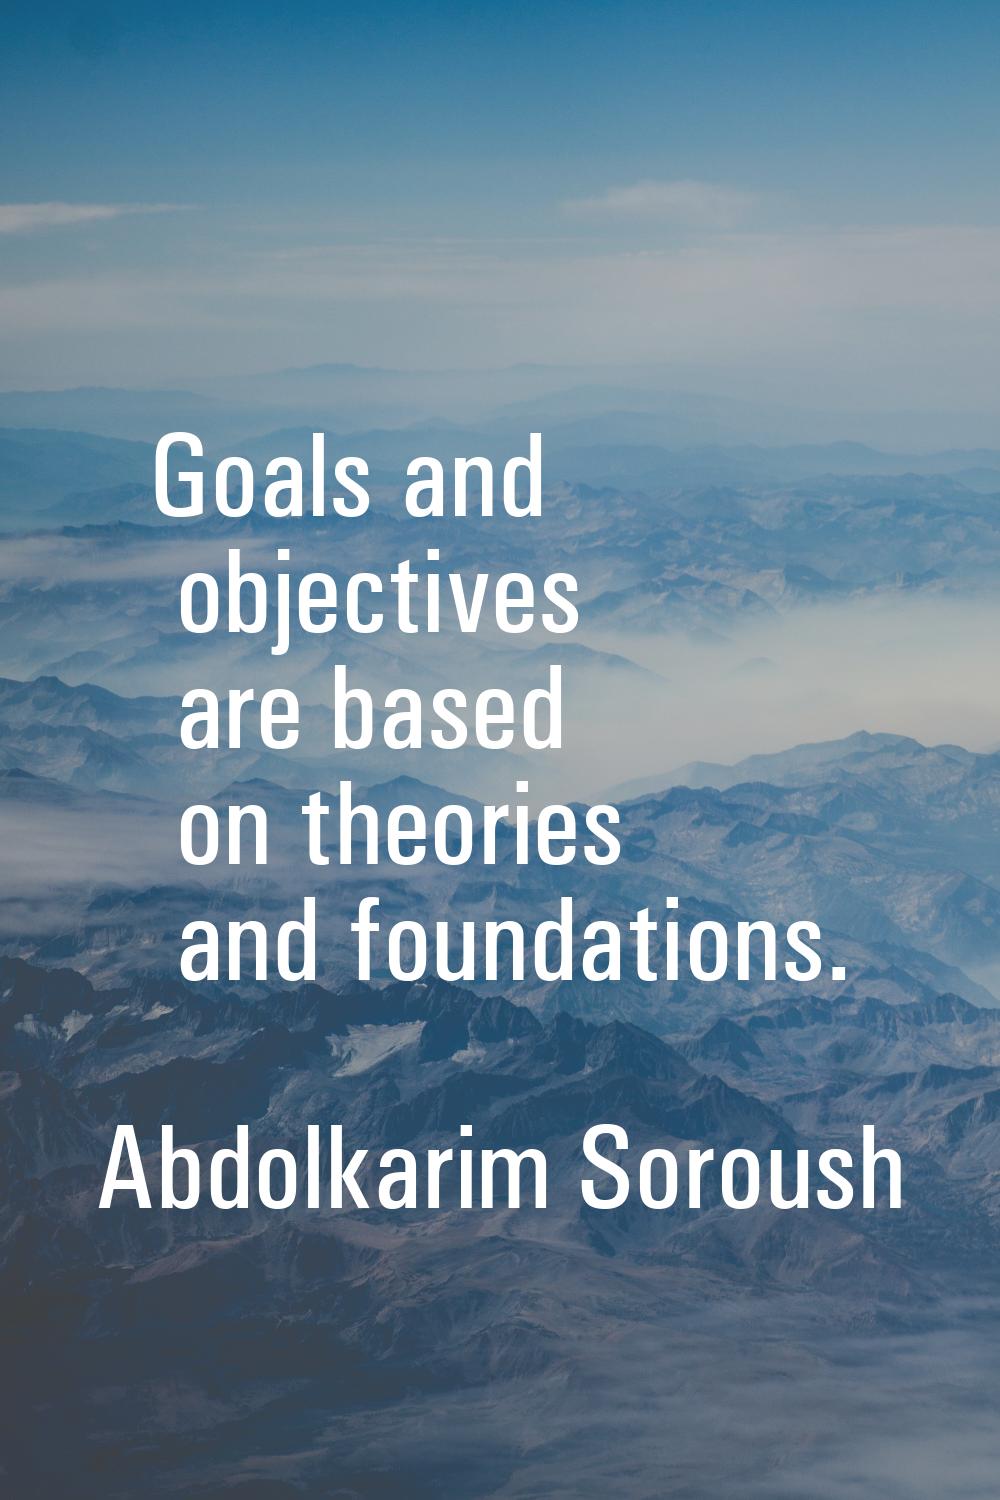 Goals and objectives are based on theories and foundations.